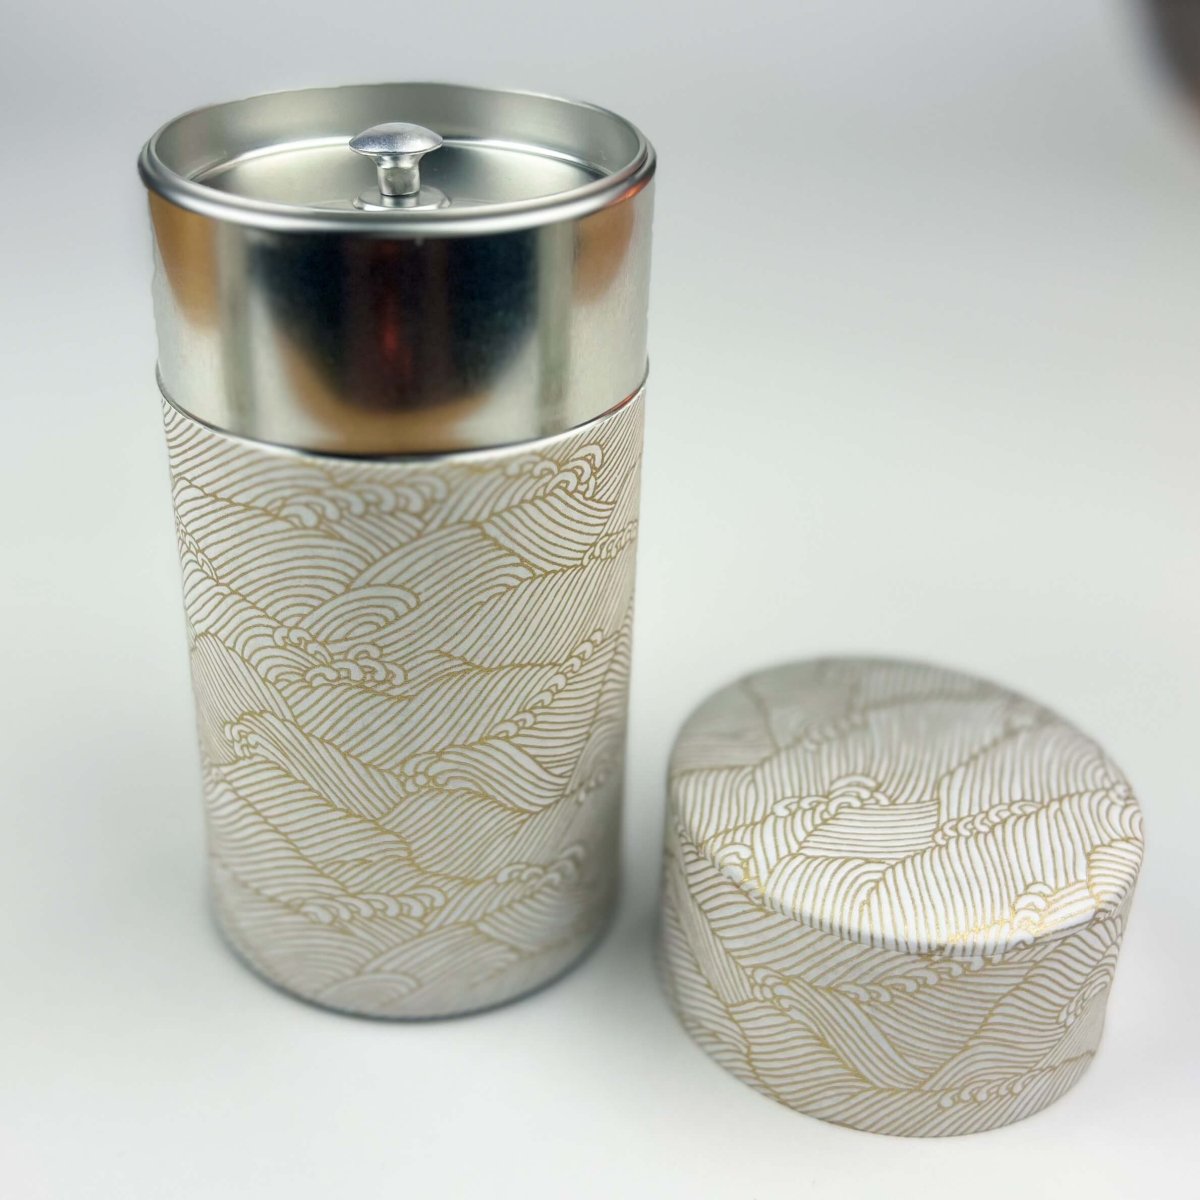 Washi Paper Japanese Tea Caddy - Tall Gold Waves